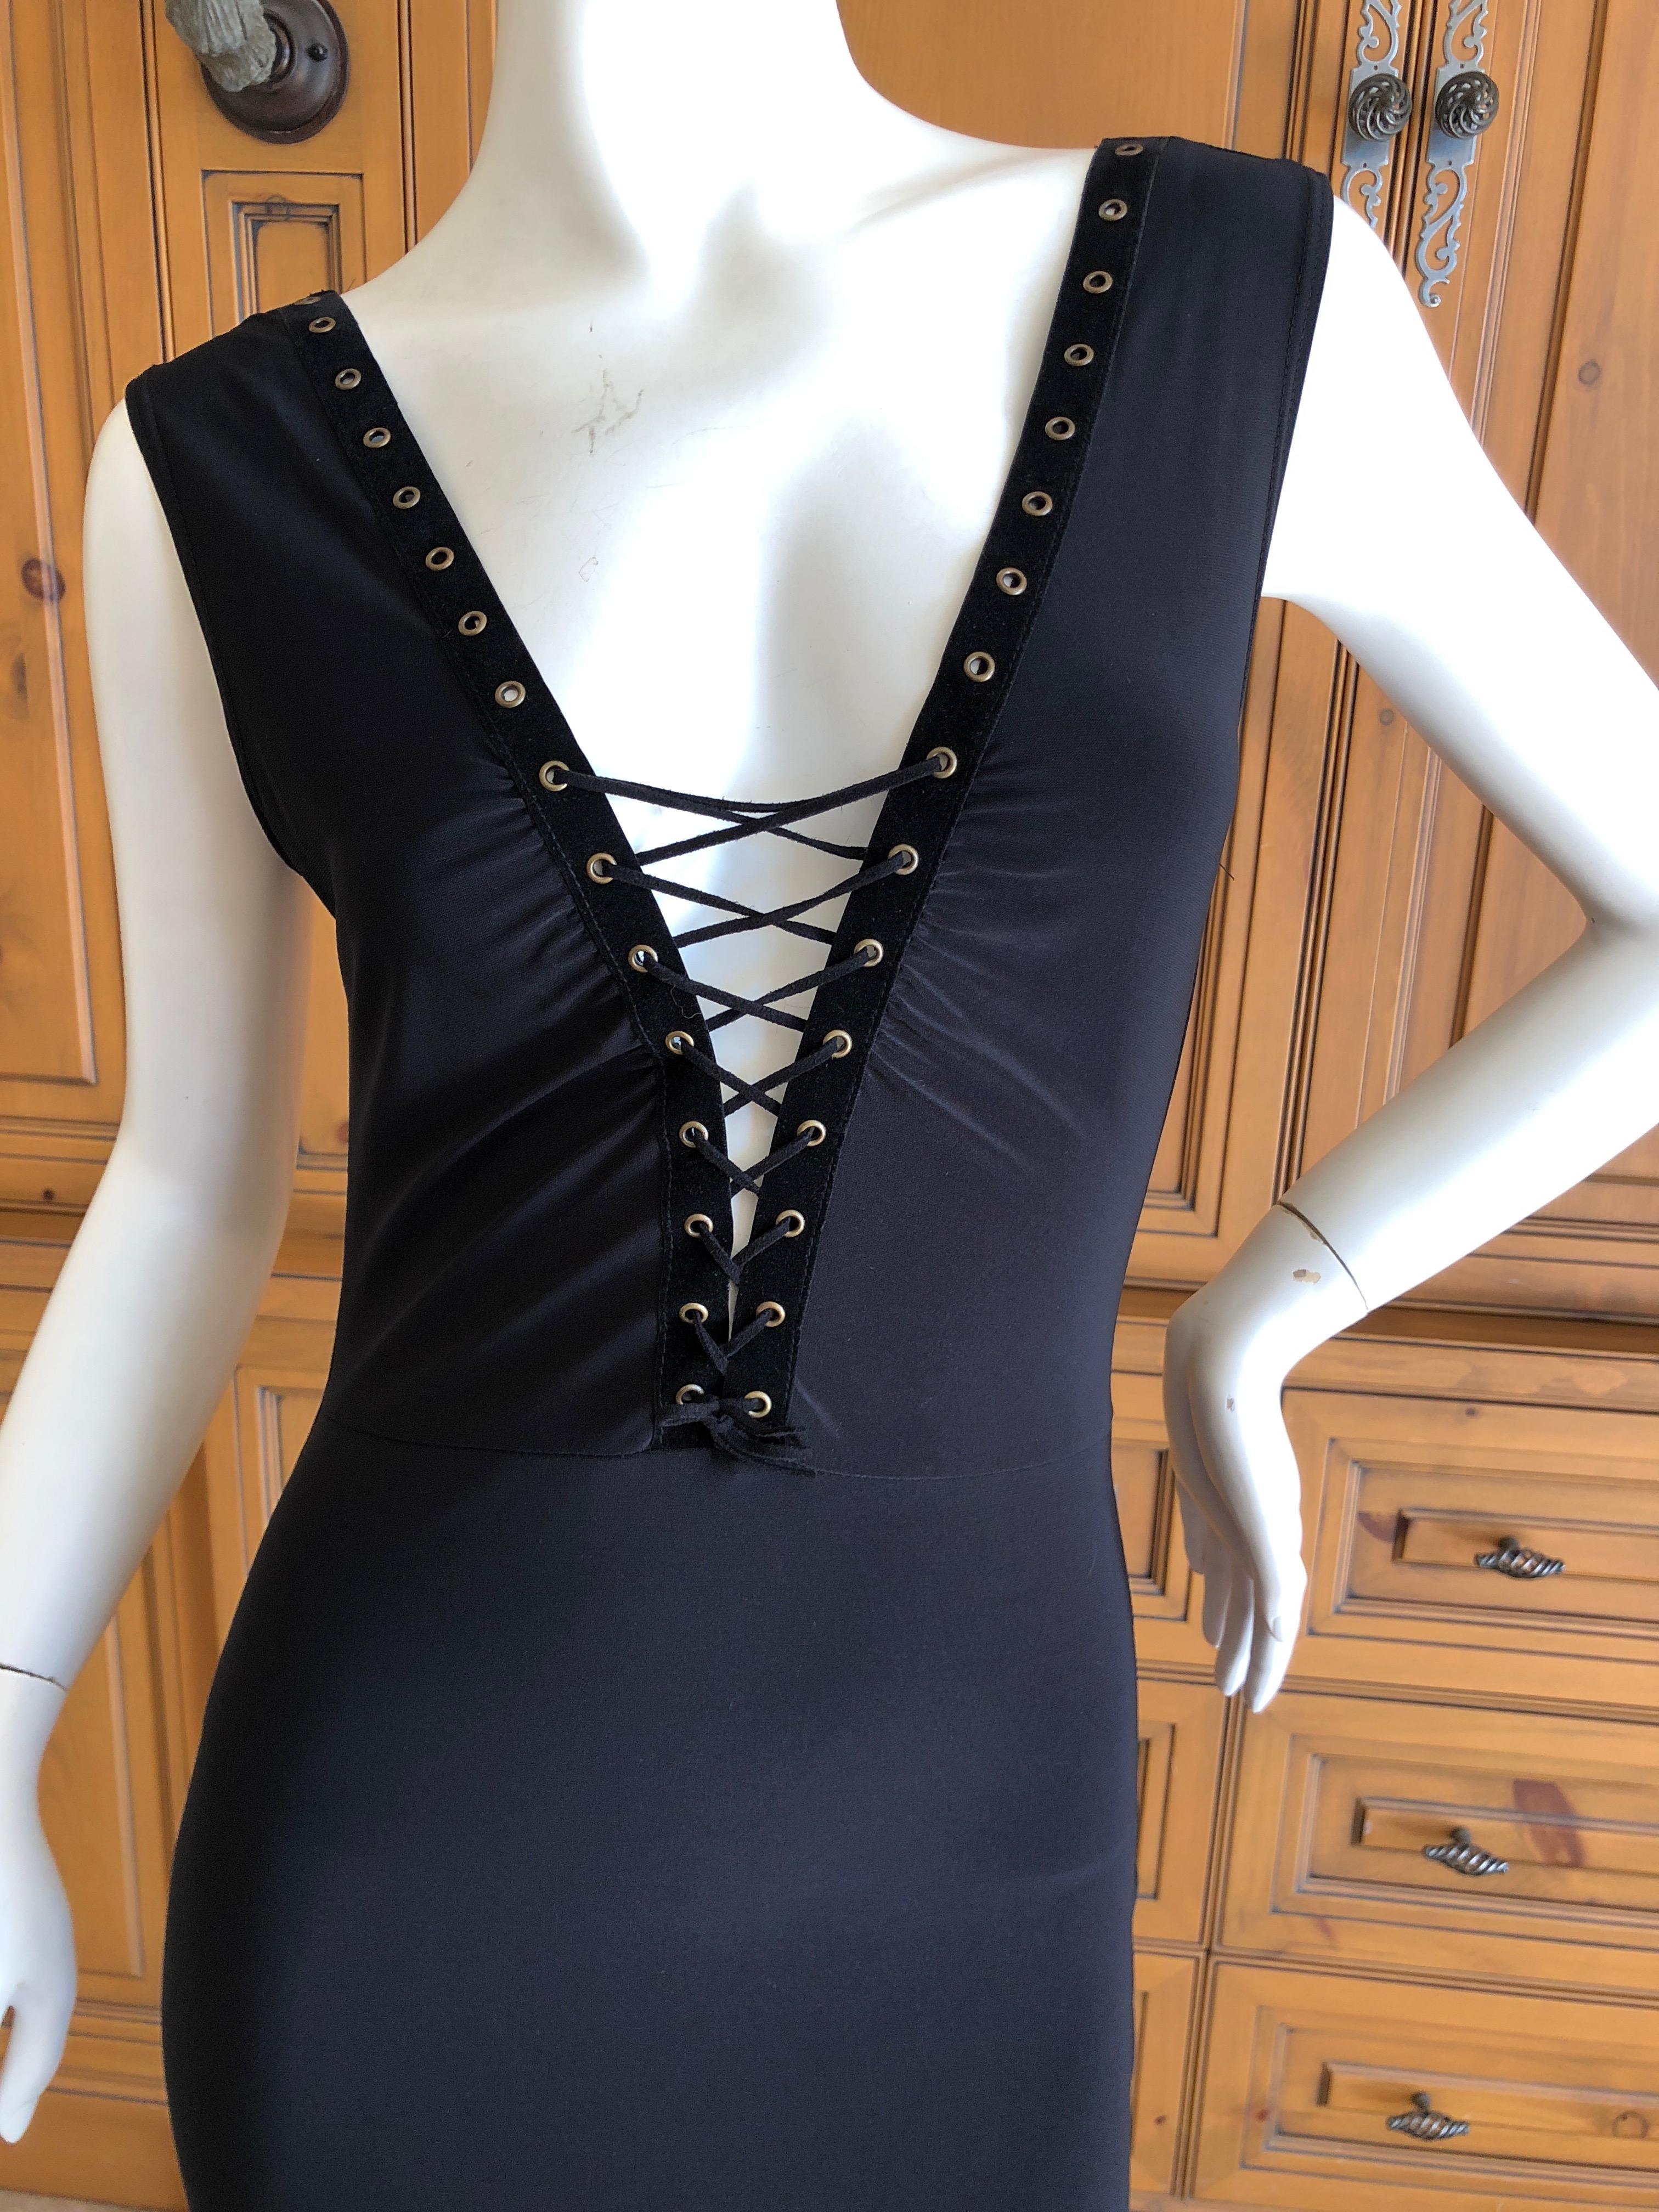  Versace Jeans Couture Plunging Velvet Trim Black Column Dress w Corset Lacing In Excellent Condition For Sale In Cloverdale, CA